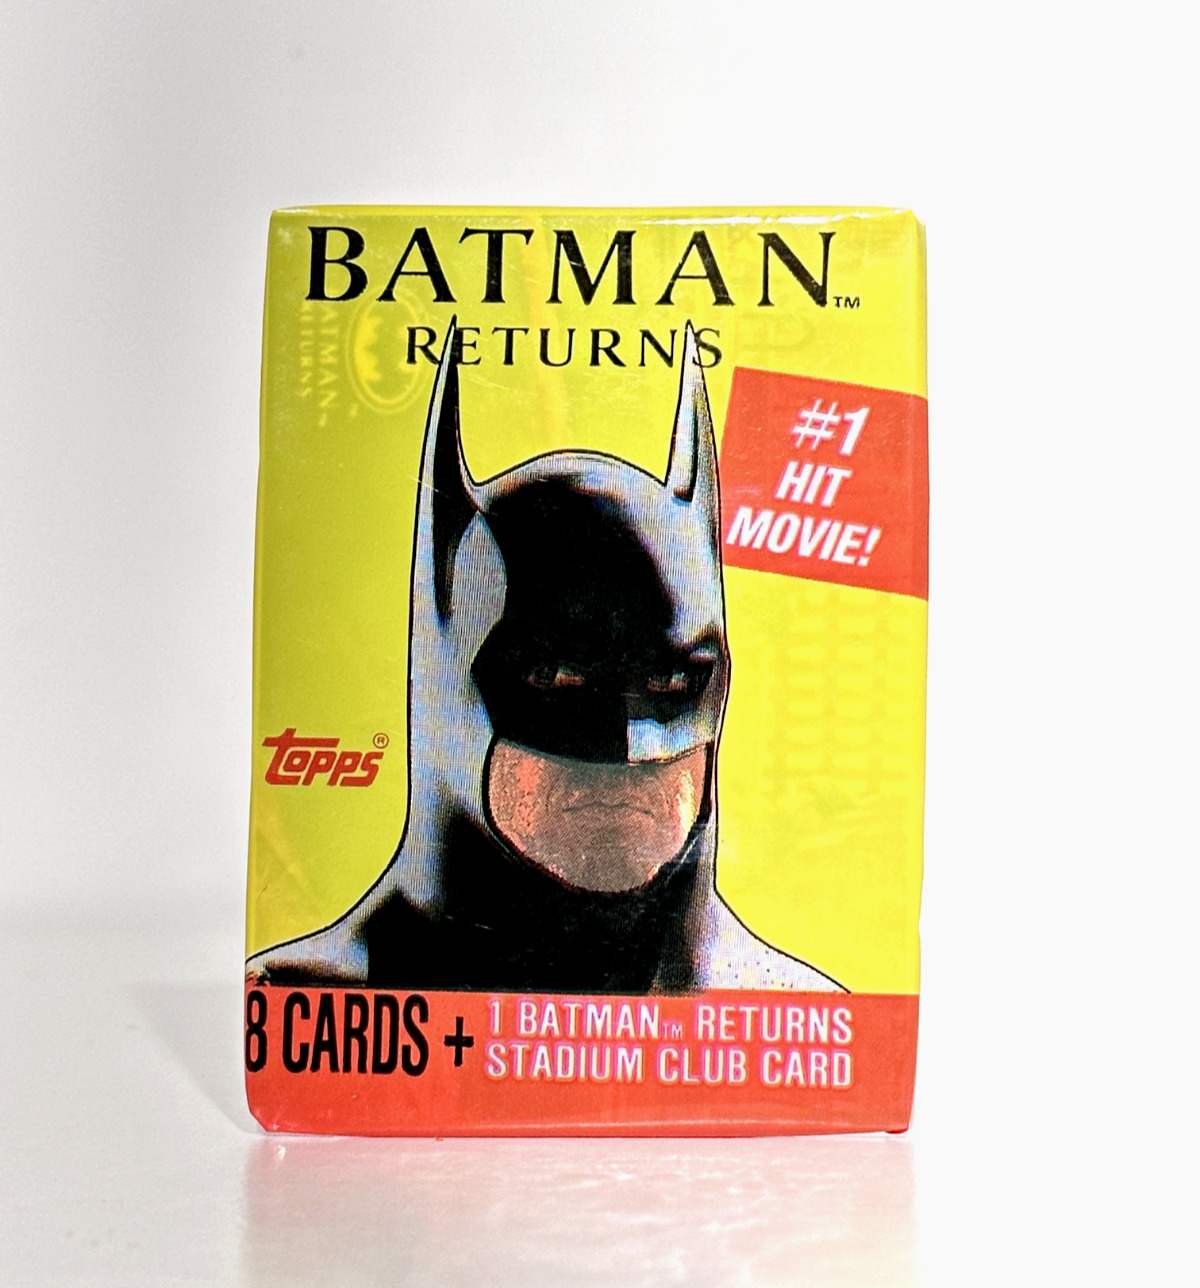 1991 Topps Batman Returns Movie Sealed Trading Card Pack, 8 Cards